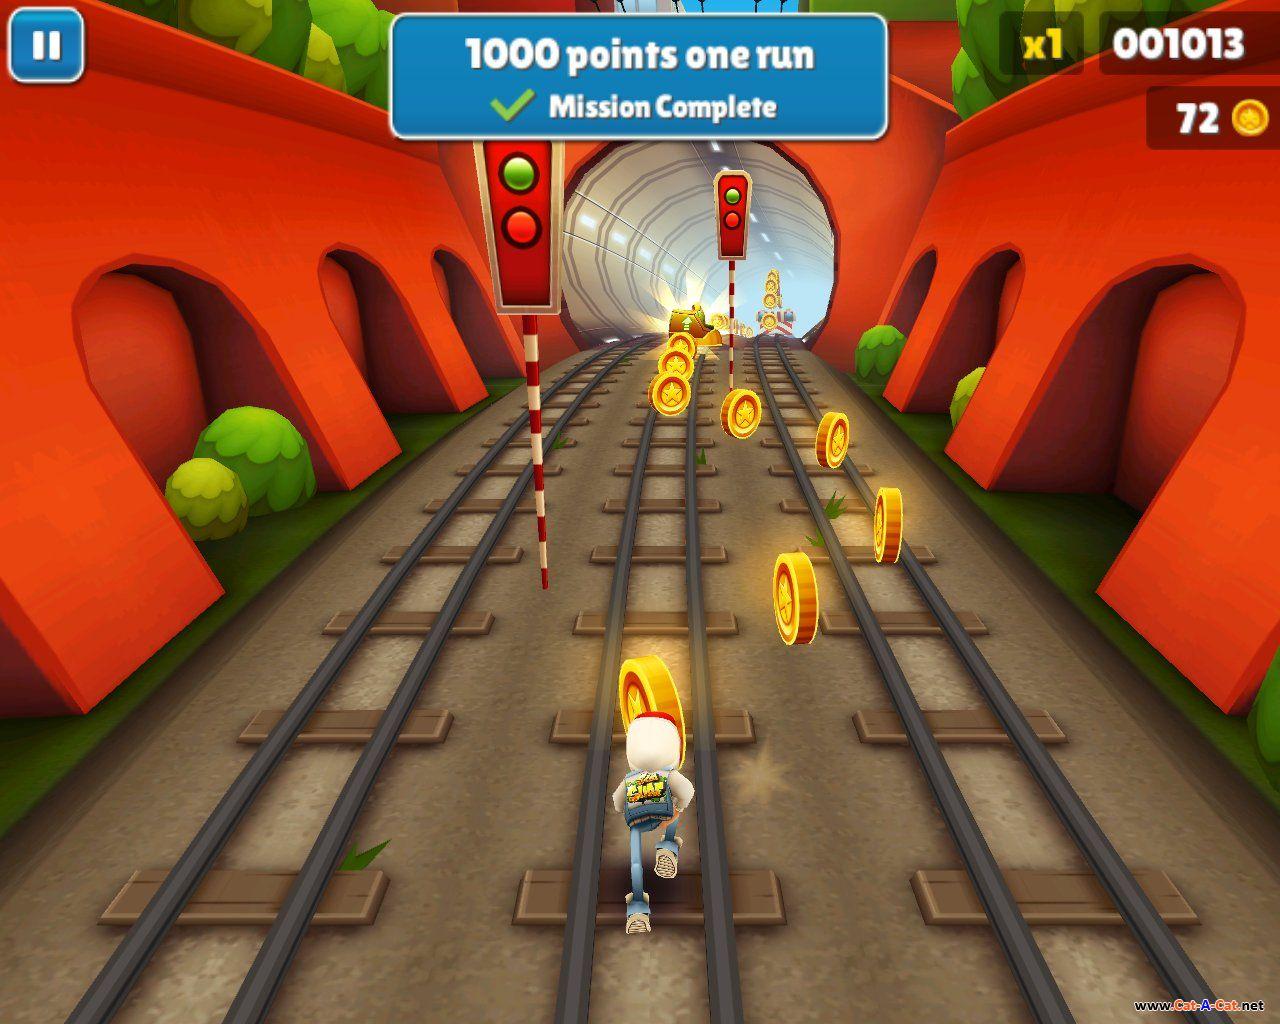 How to get Unlimited Coins in Subway Surfer YOU NEED